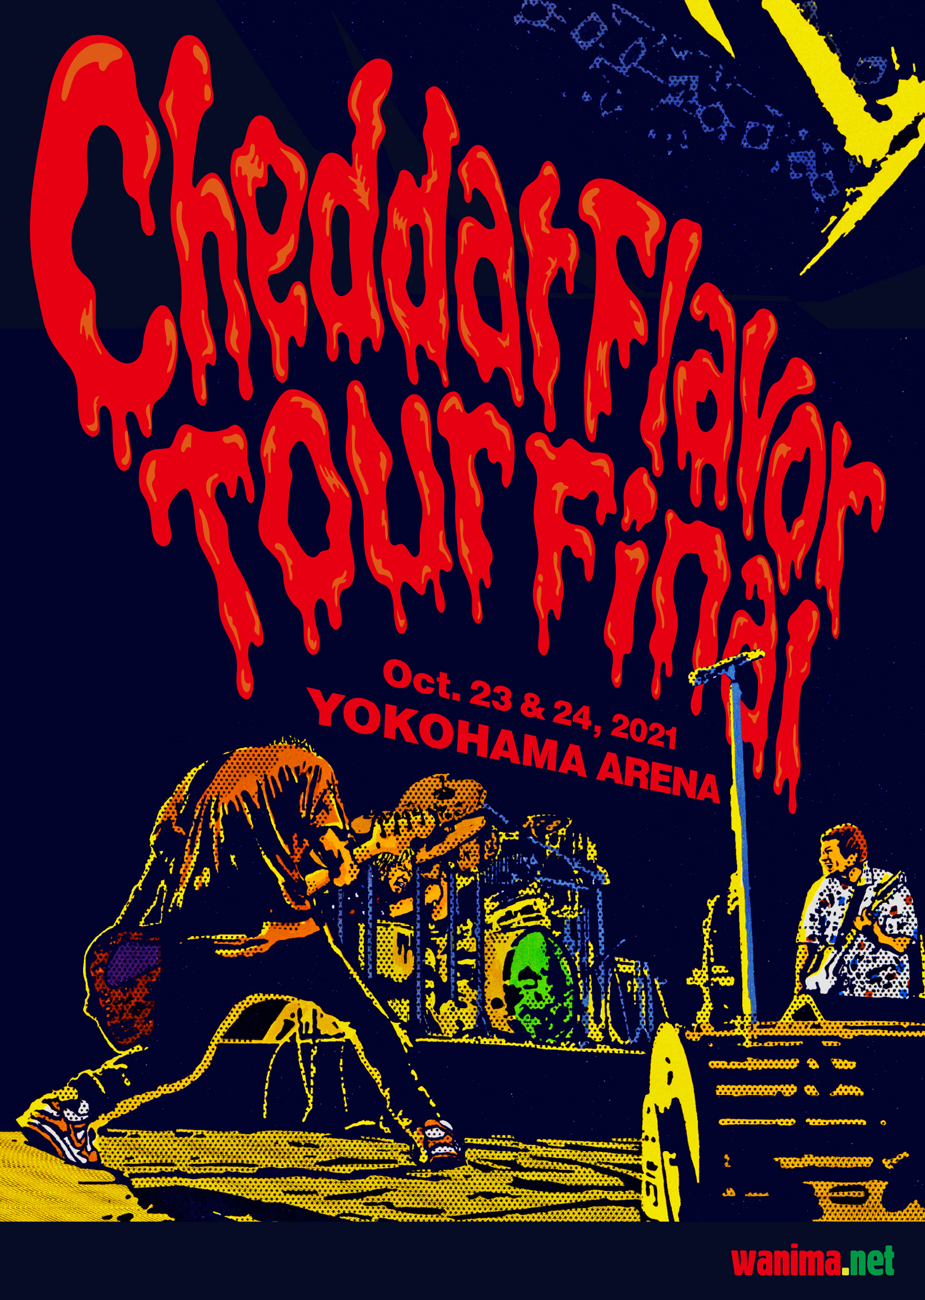 Wanima Cheddar Flavor Tour 21 新木場2デイズ完遂 横浜アリーナ公演も発表 画像一覧 The First Times